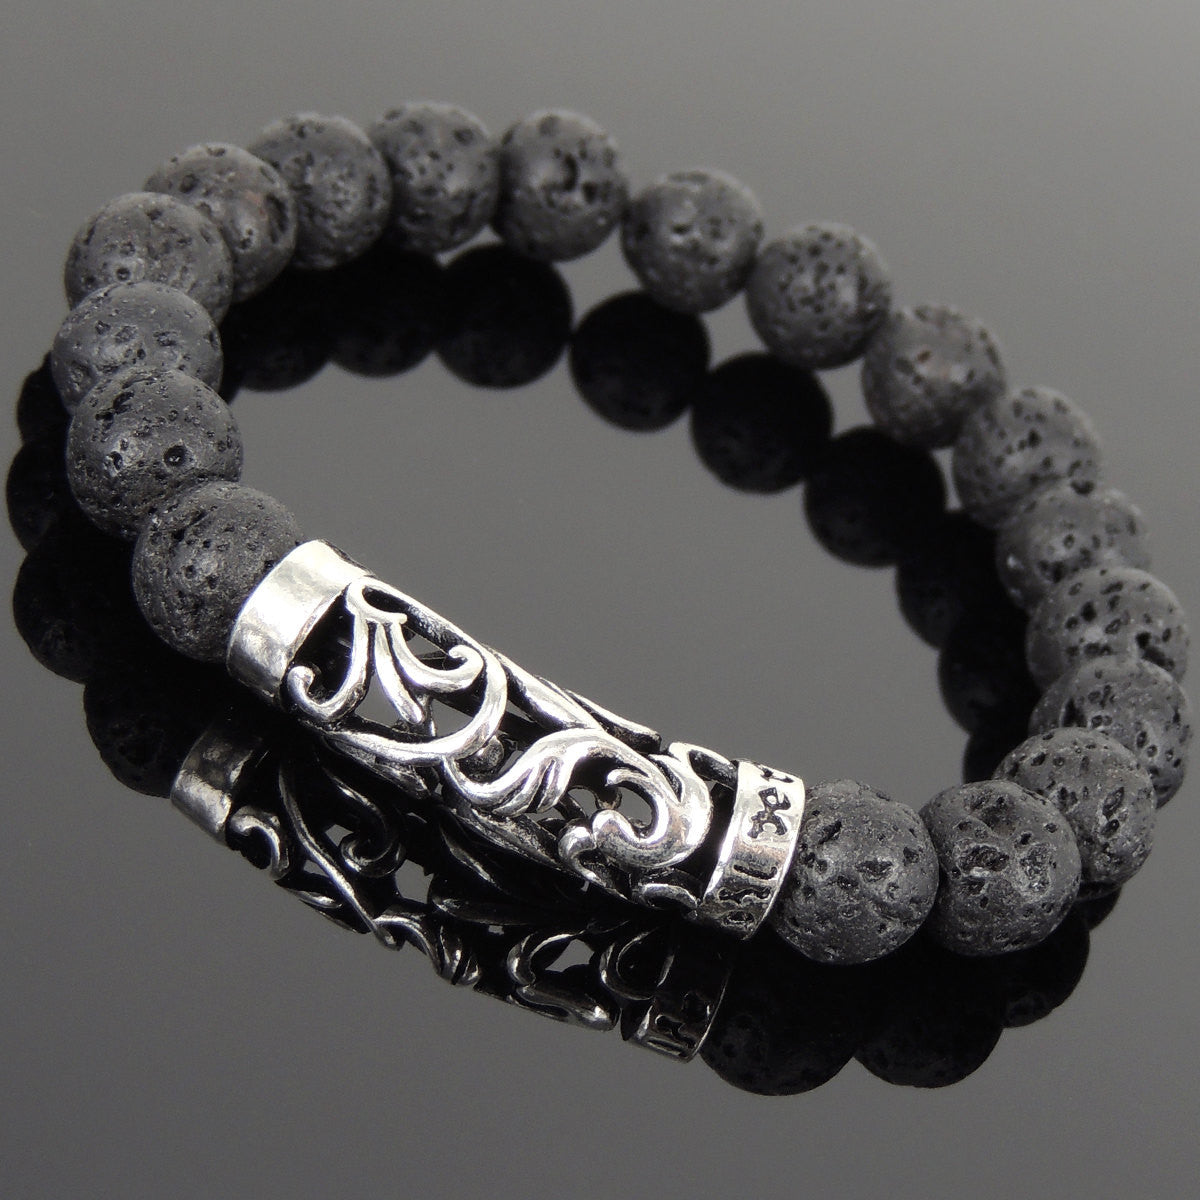 10mm Lava Rock Healing Stone Bracelet with S925 Sterling Silver Celtic Charm - Handmade by Gem & Silver BR945